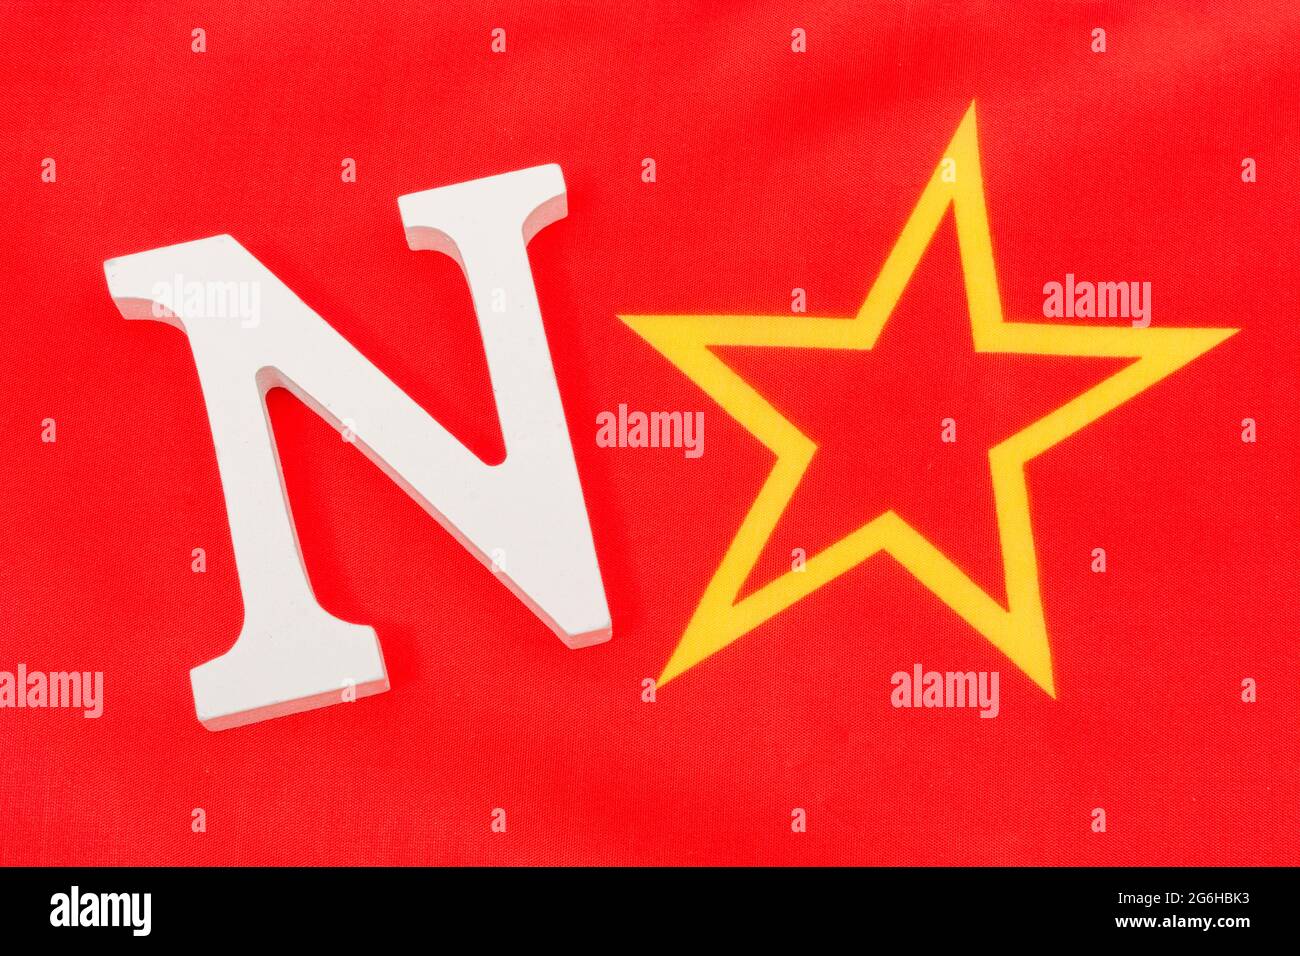 Wood N & Soviet style Red Star to form 'No'. For battle to teach CRT / Critical Race Theory is America's schools as parents push back. US and Marxism. Stock Photo